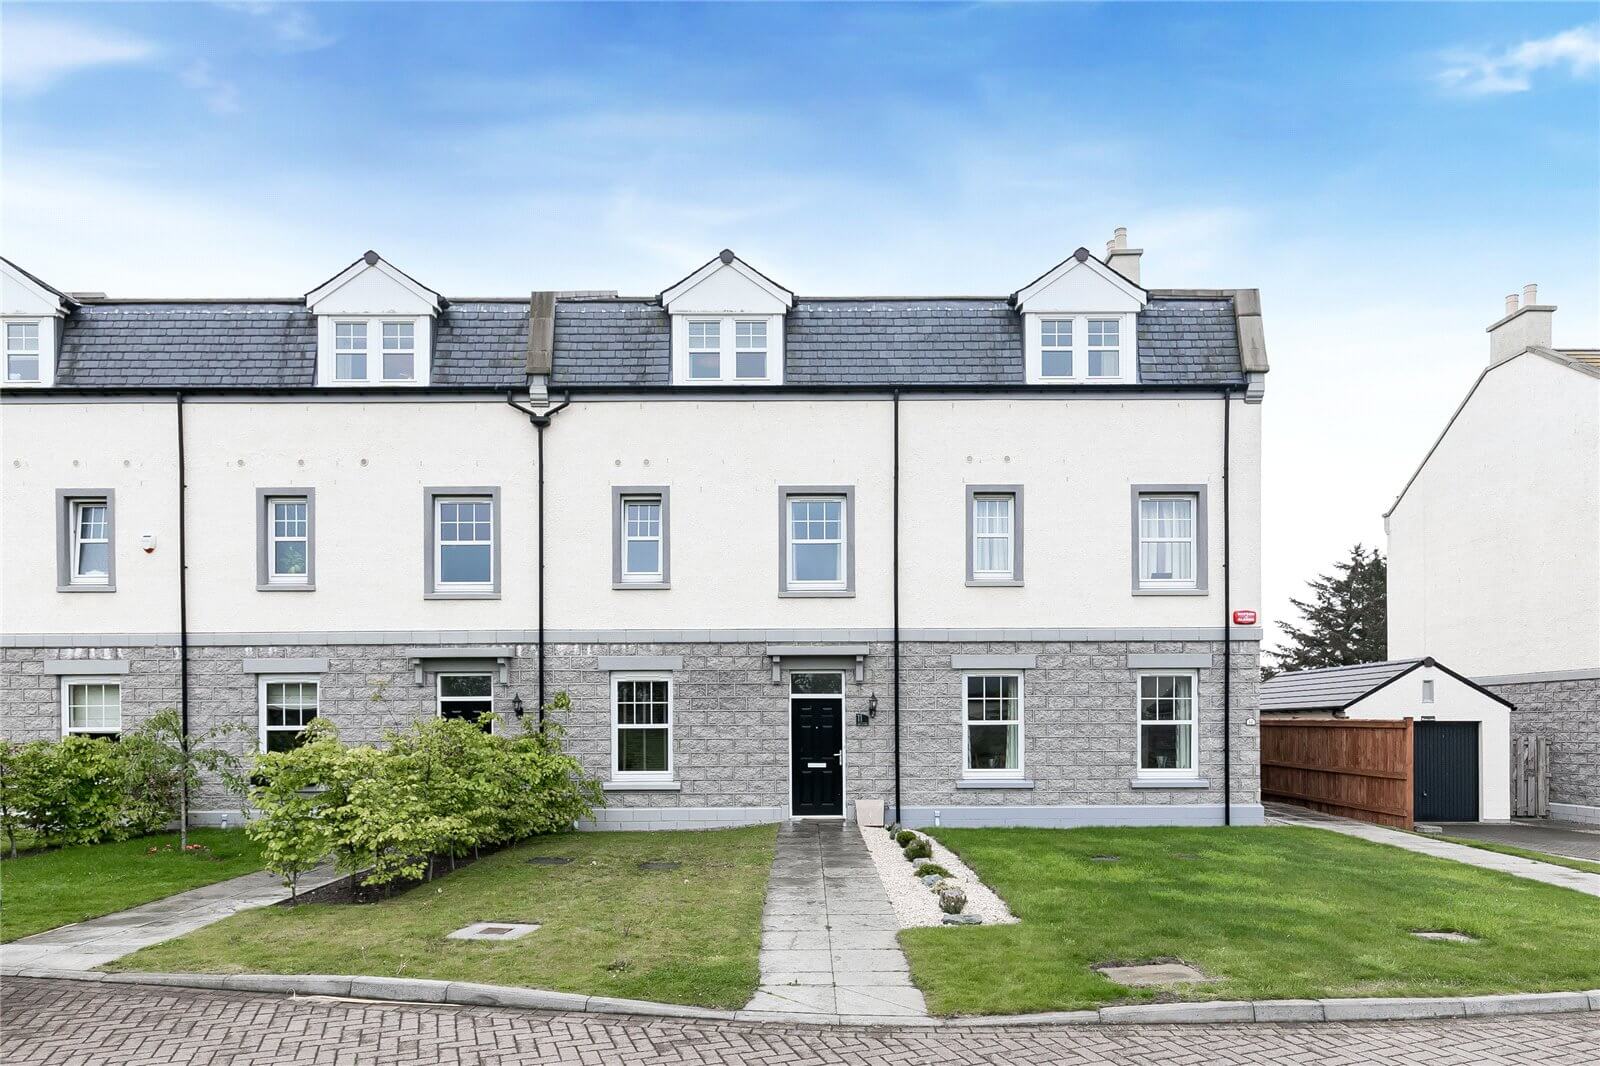 Our latest properties for sale and to let (7th June 2019)